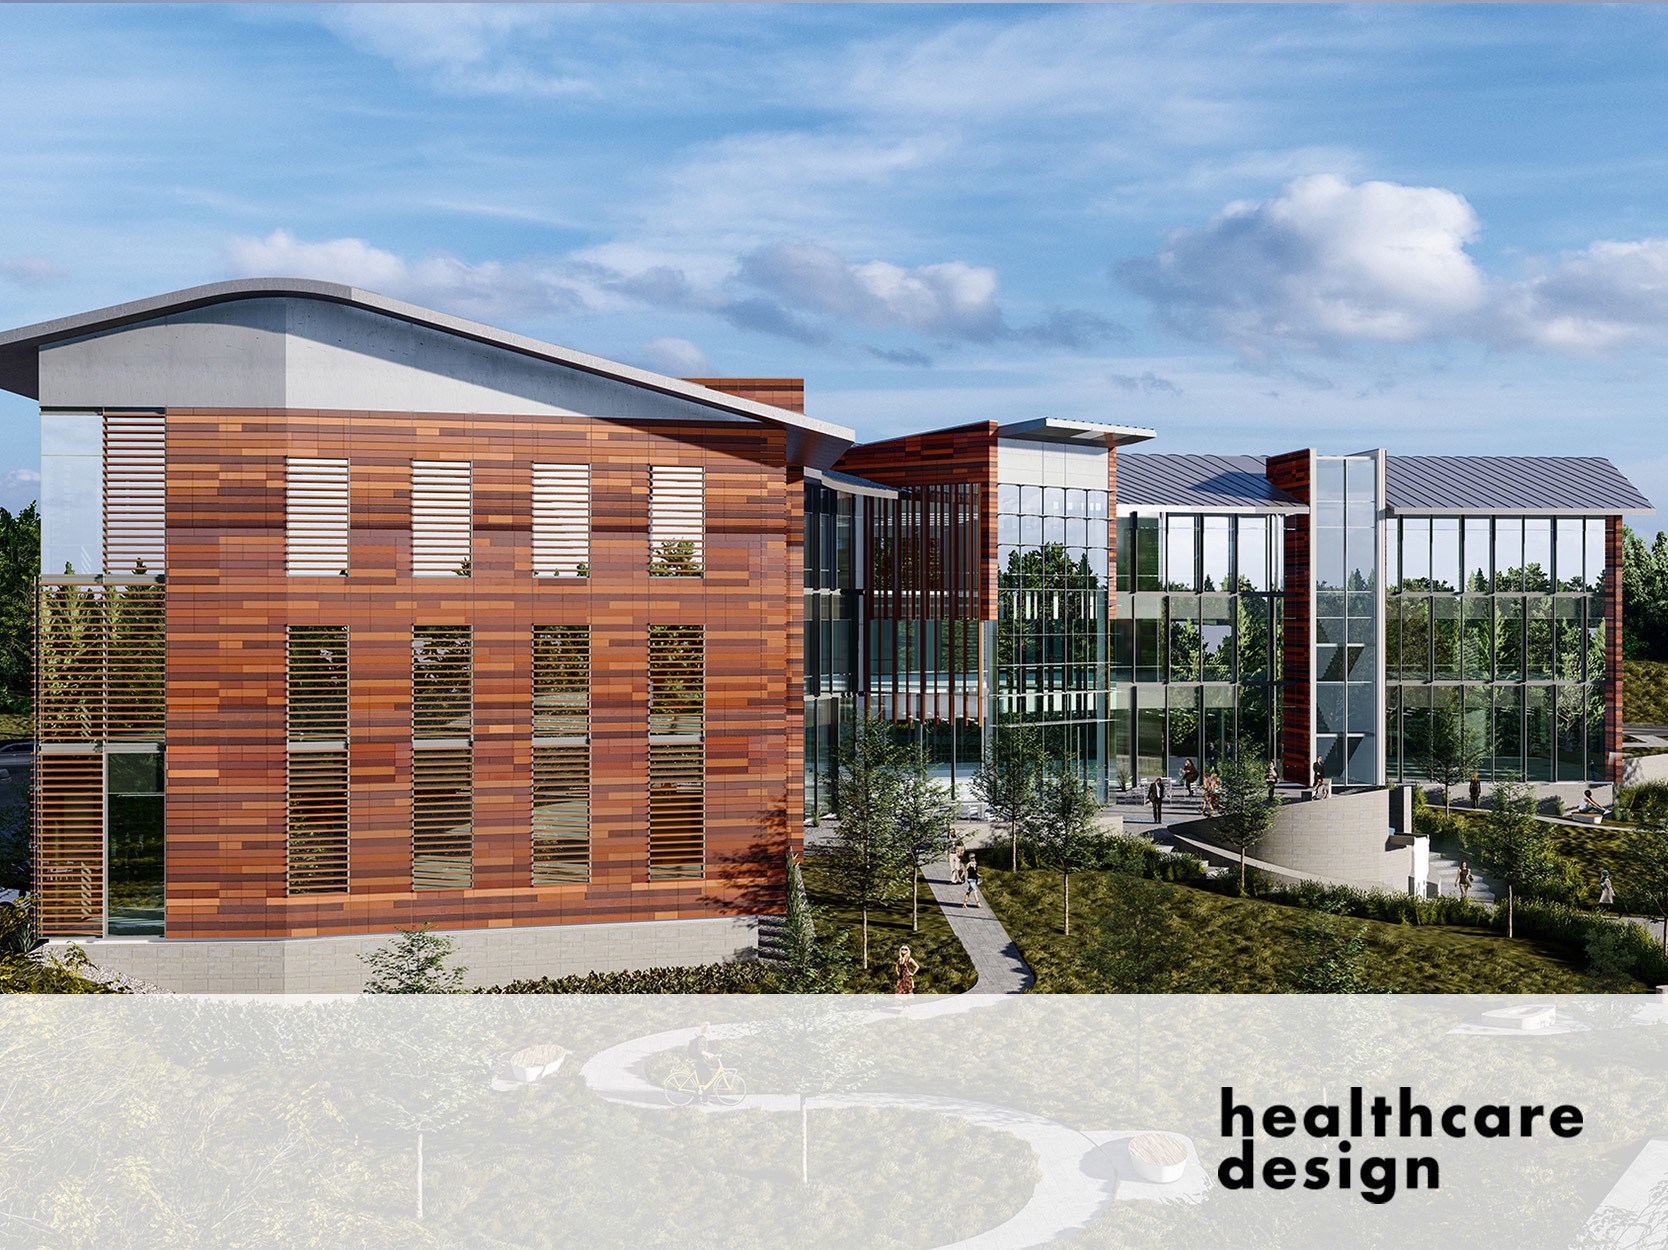 How COVID-19 Is Changing Behavioral Healthcare Facility Design